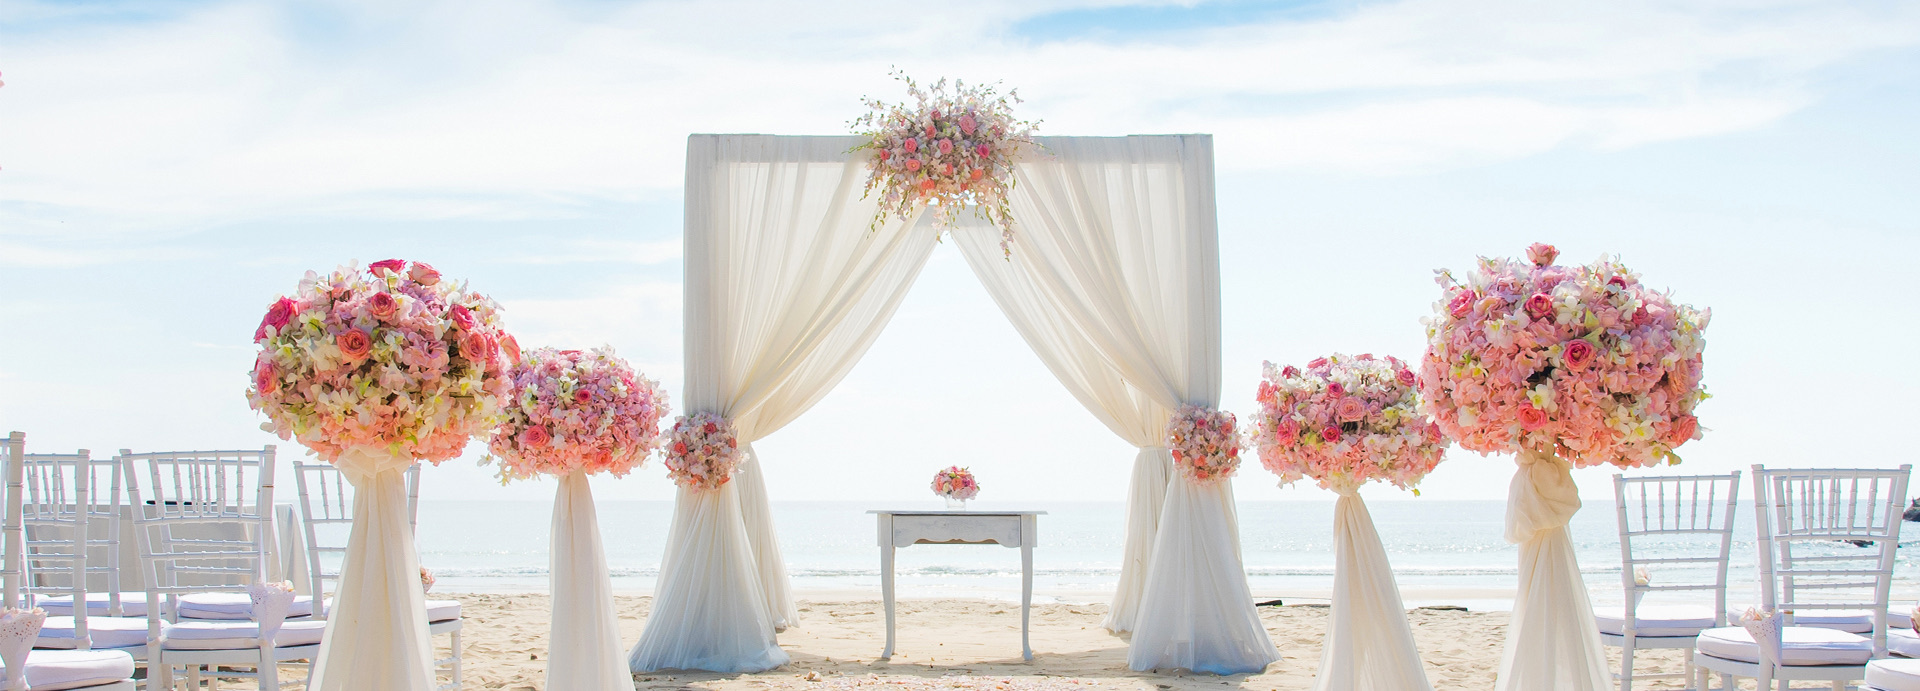 Wedding setup on the beach with white canopy over the alter and the ocean in the distance during the day.